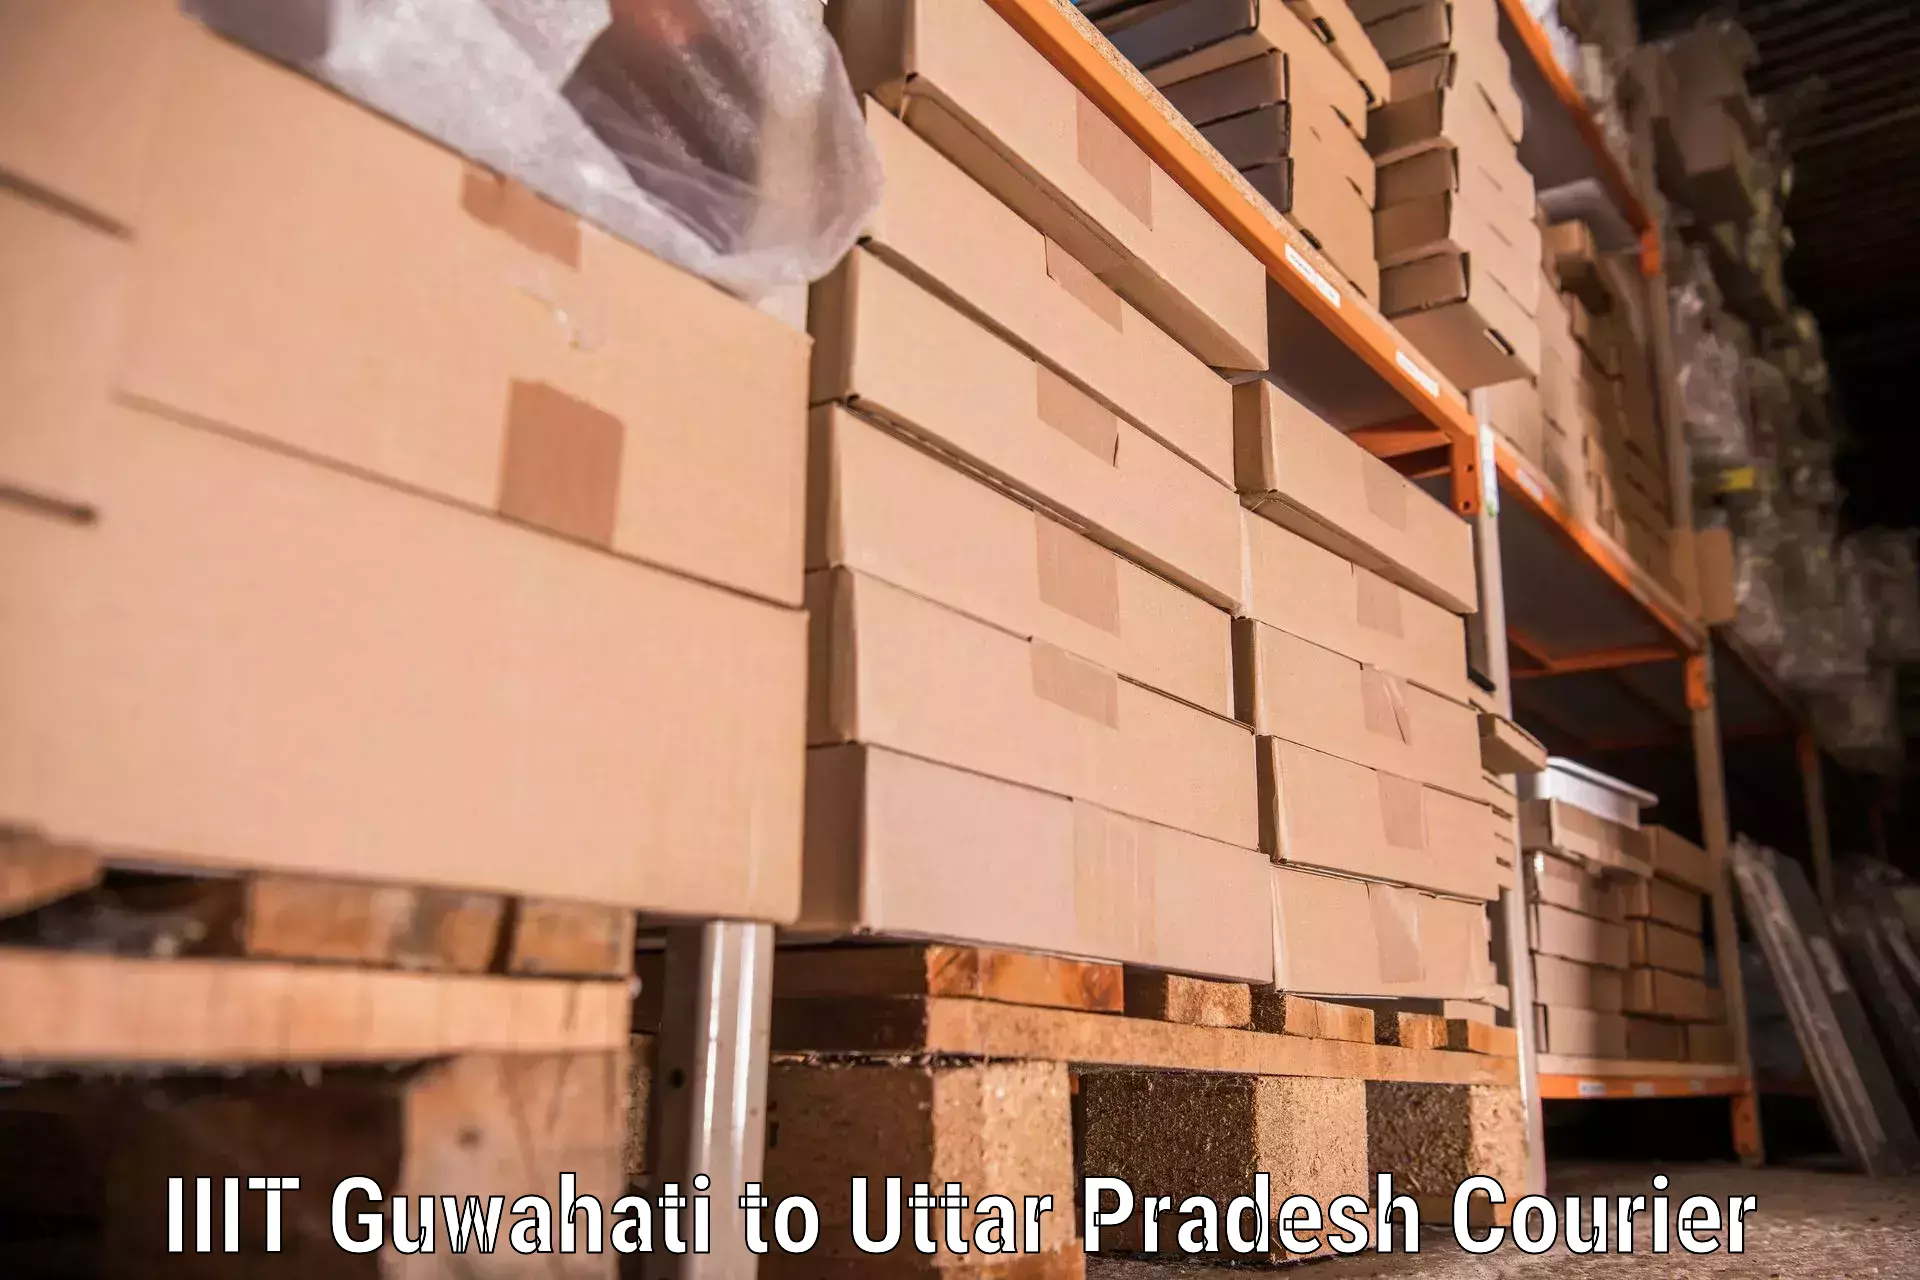 Professional packing services IIIT Guwahati to Unnao